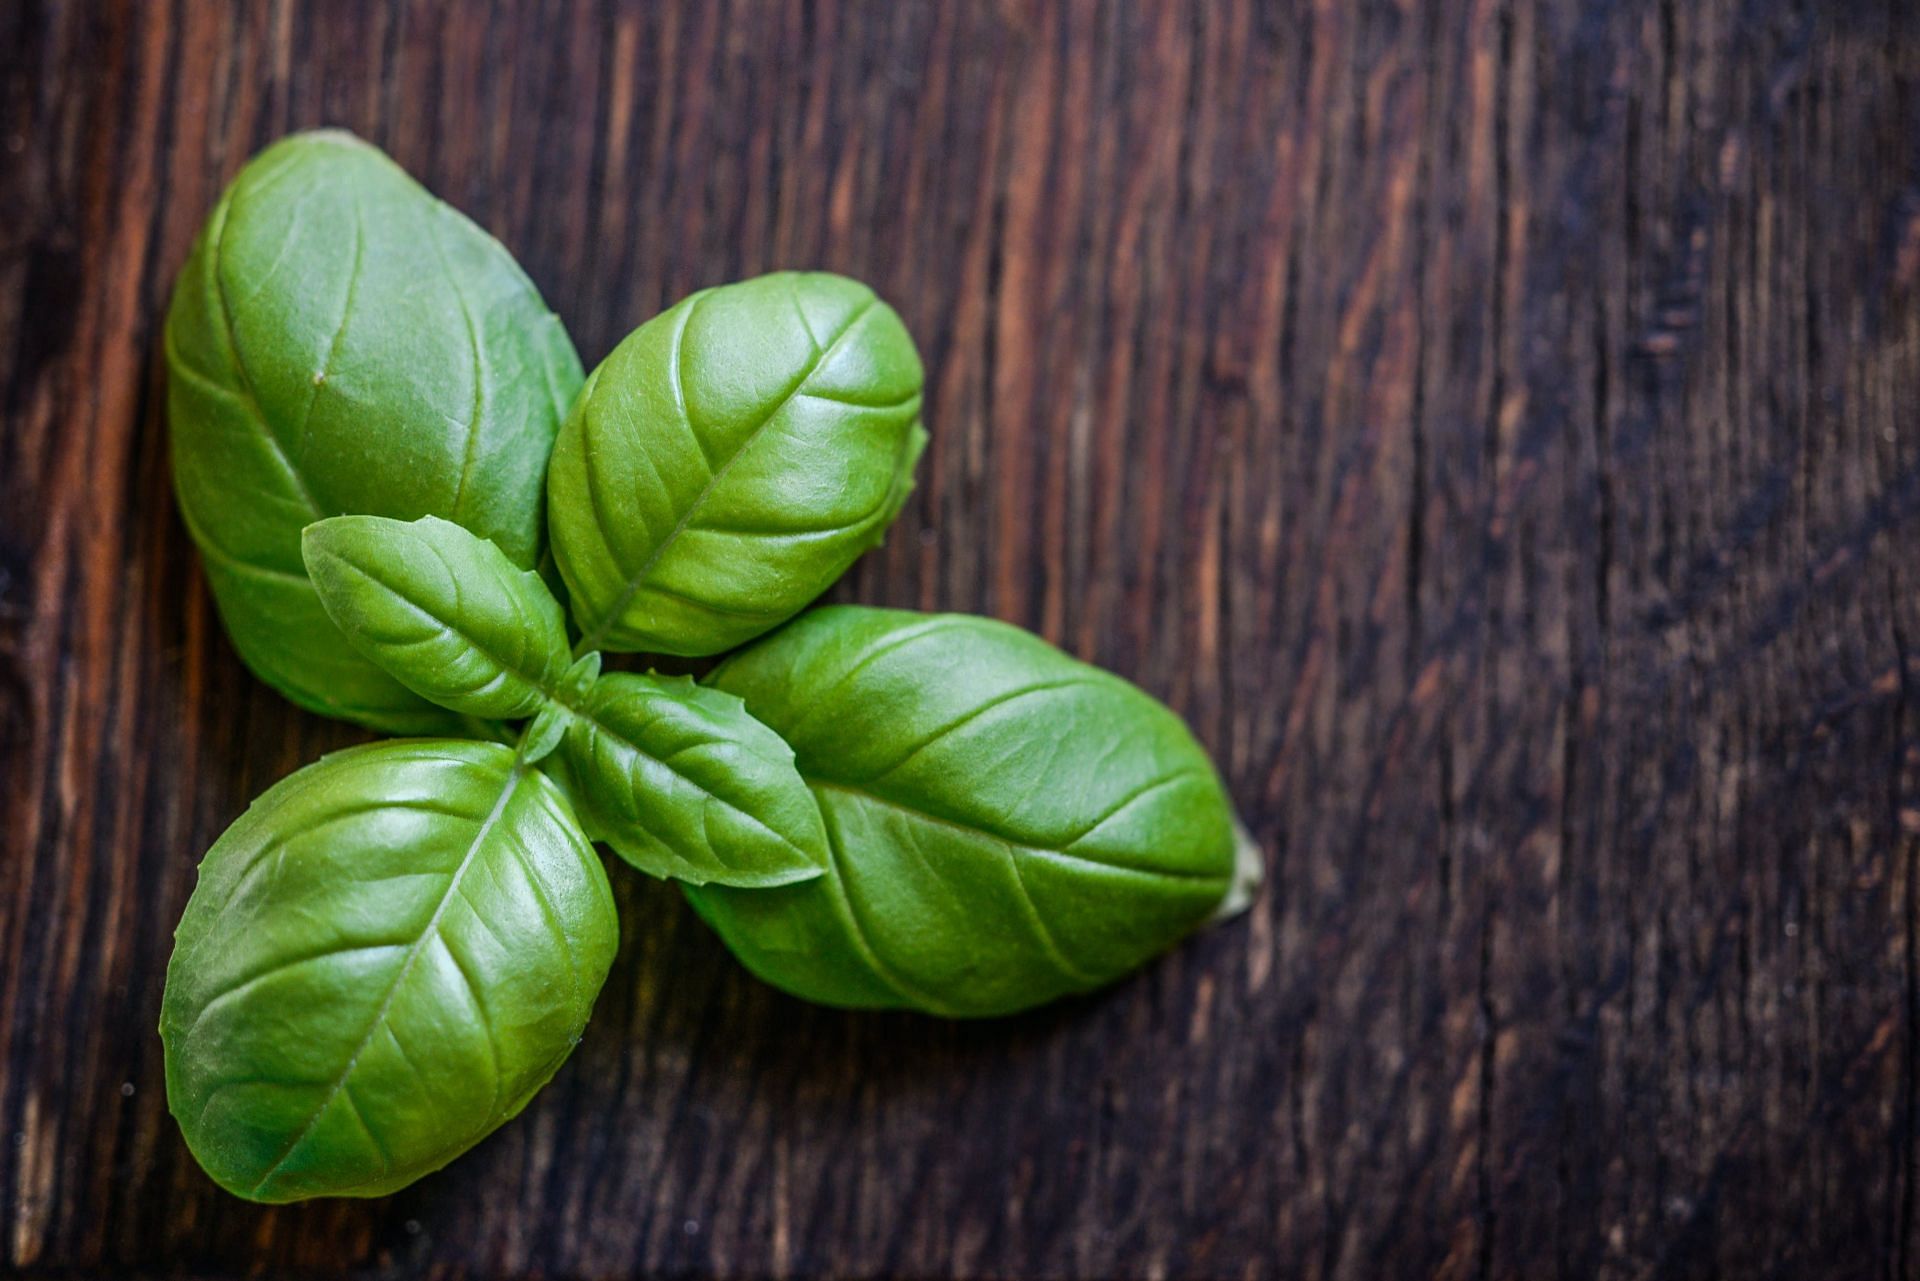 Importance of Basil essential oil benefits (image sourced via Pexels / Photo by monicore)